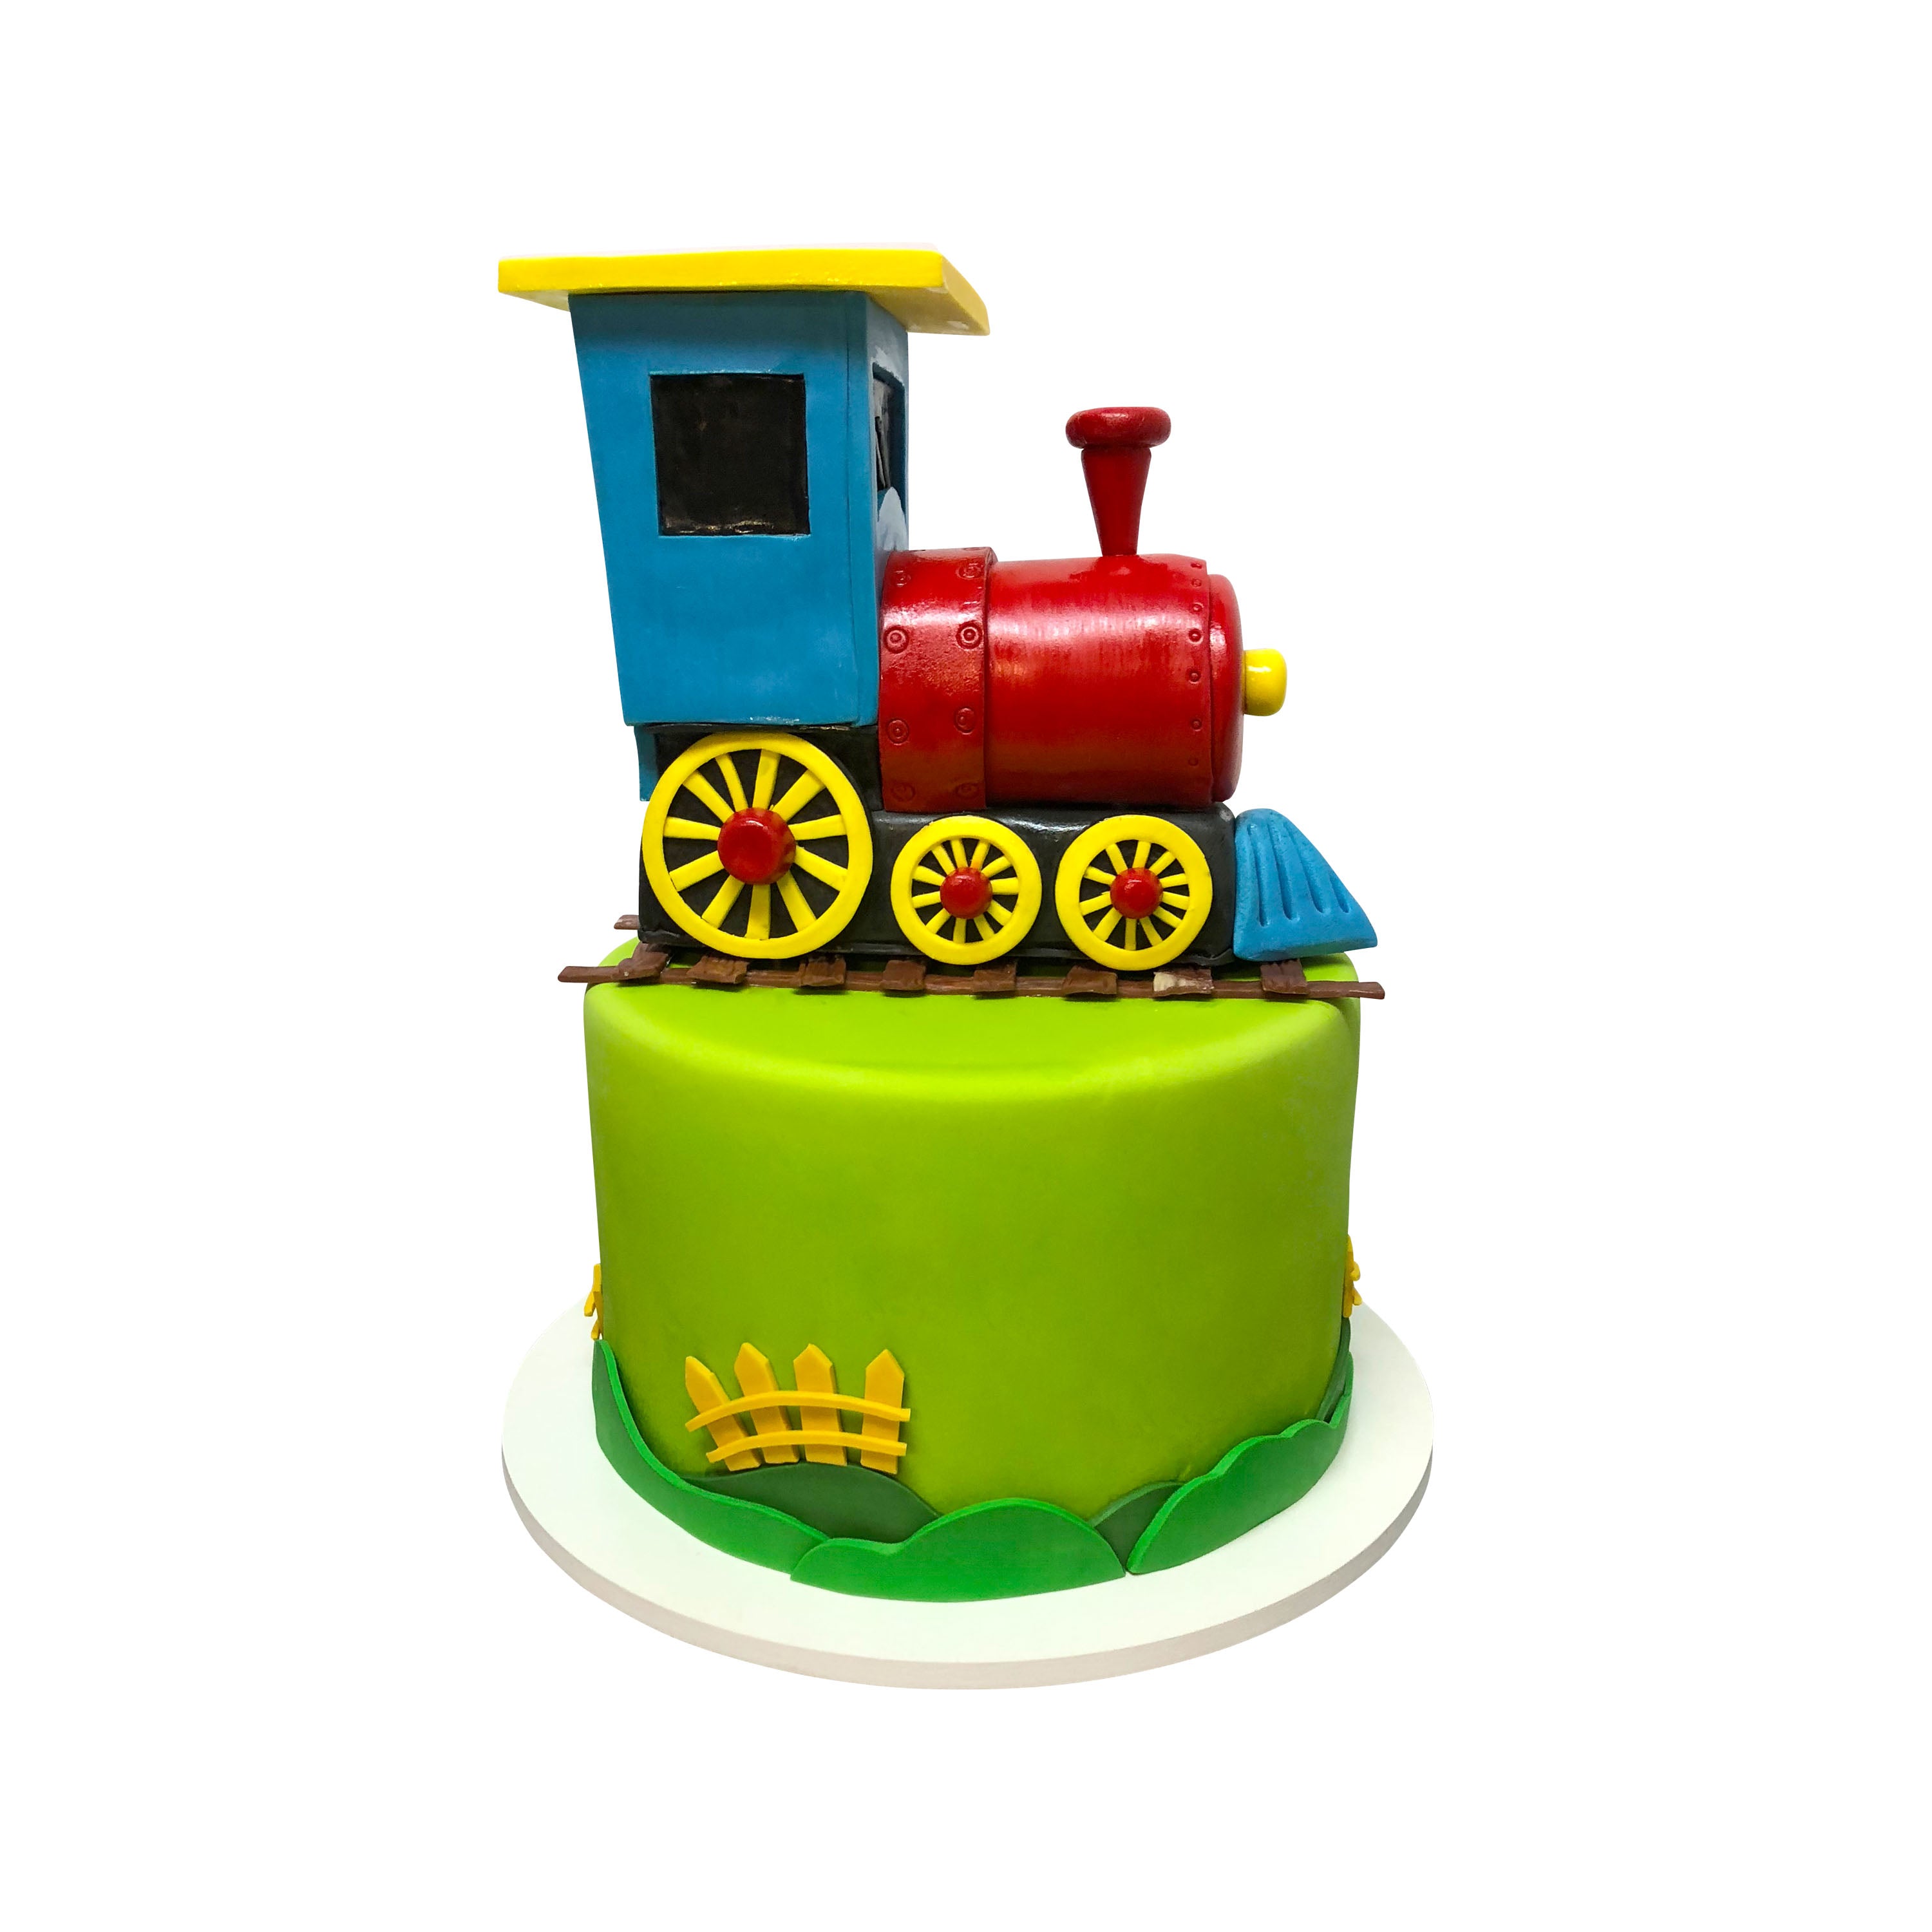 The Toy Train Cake CKR23 – Sweetest Moments Singapore